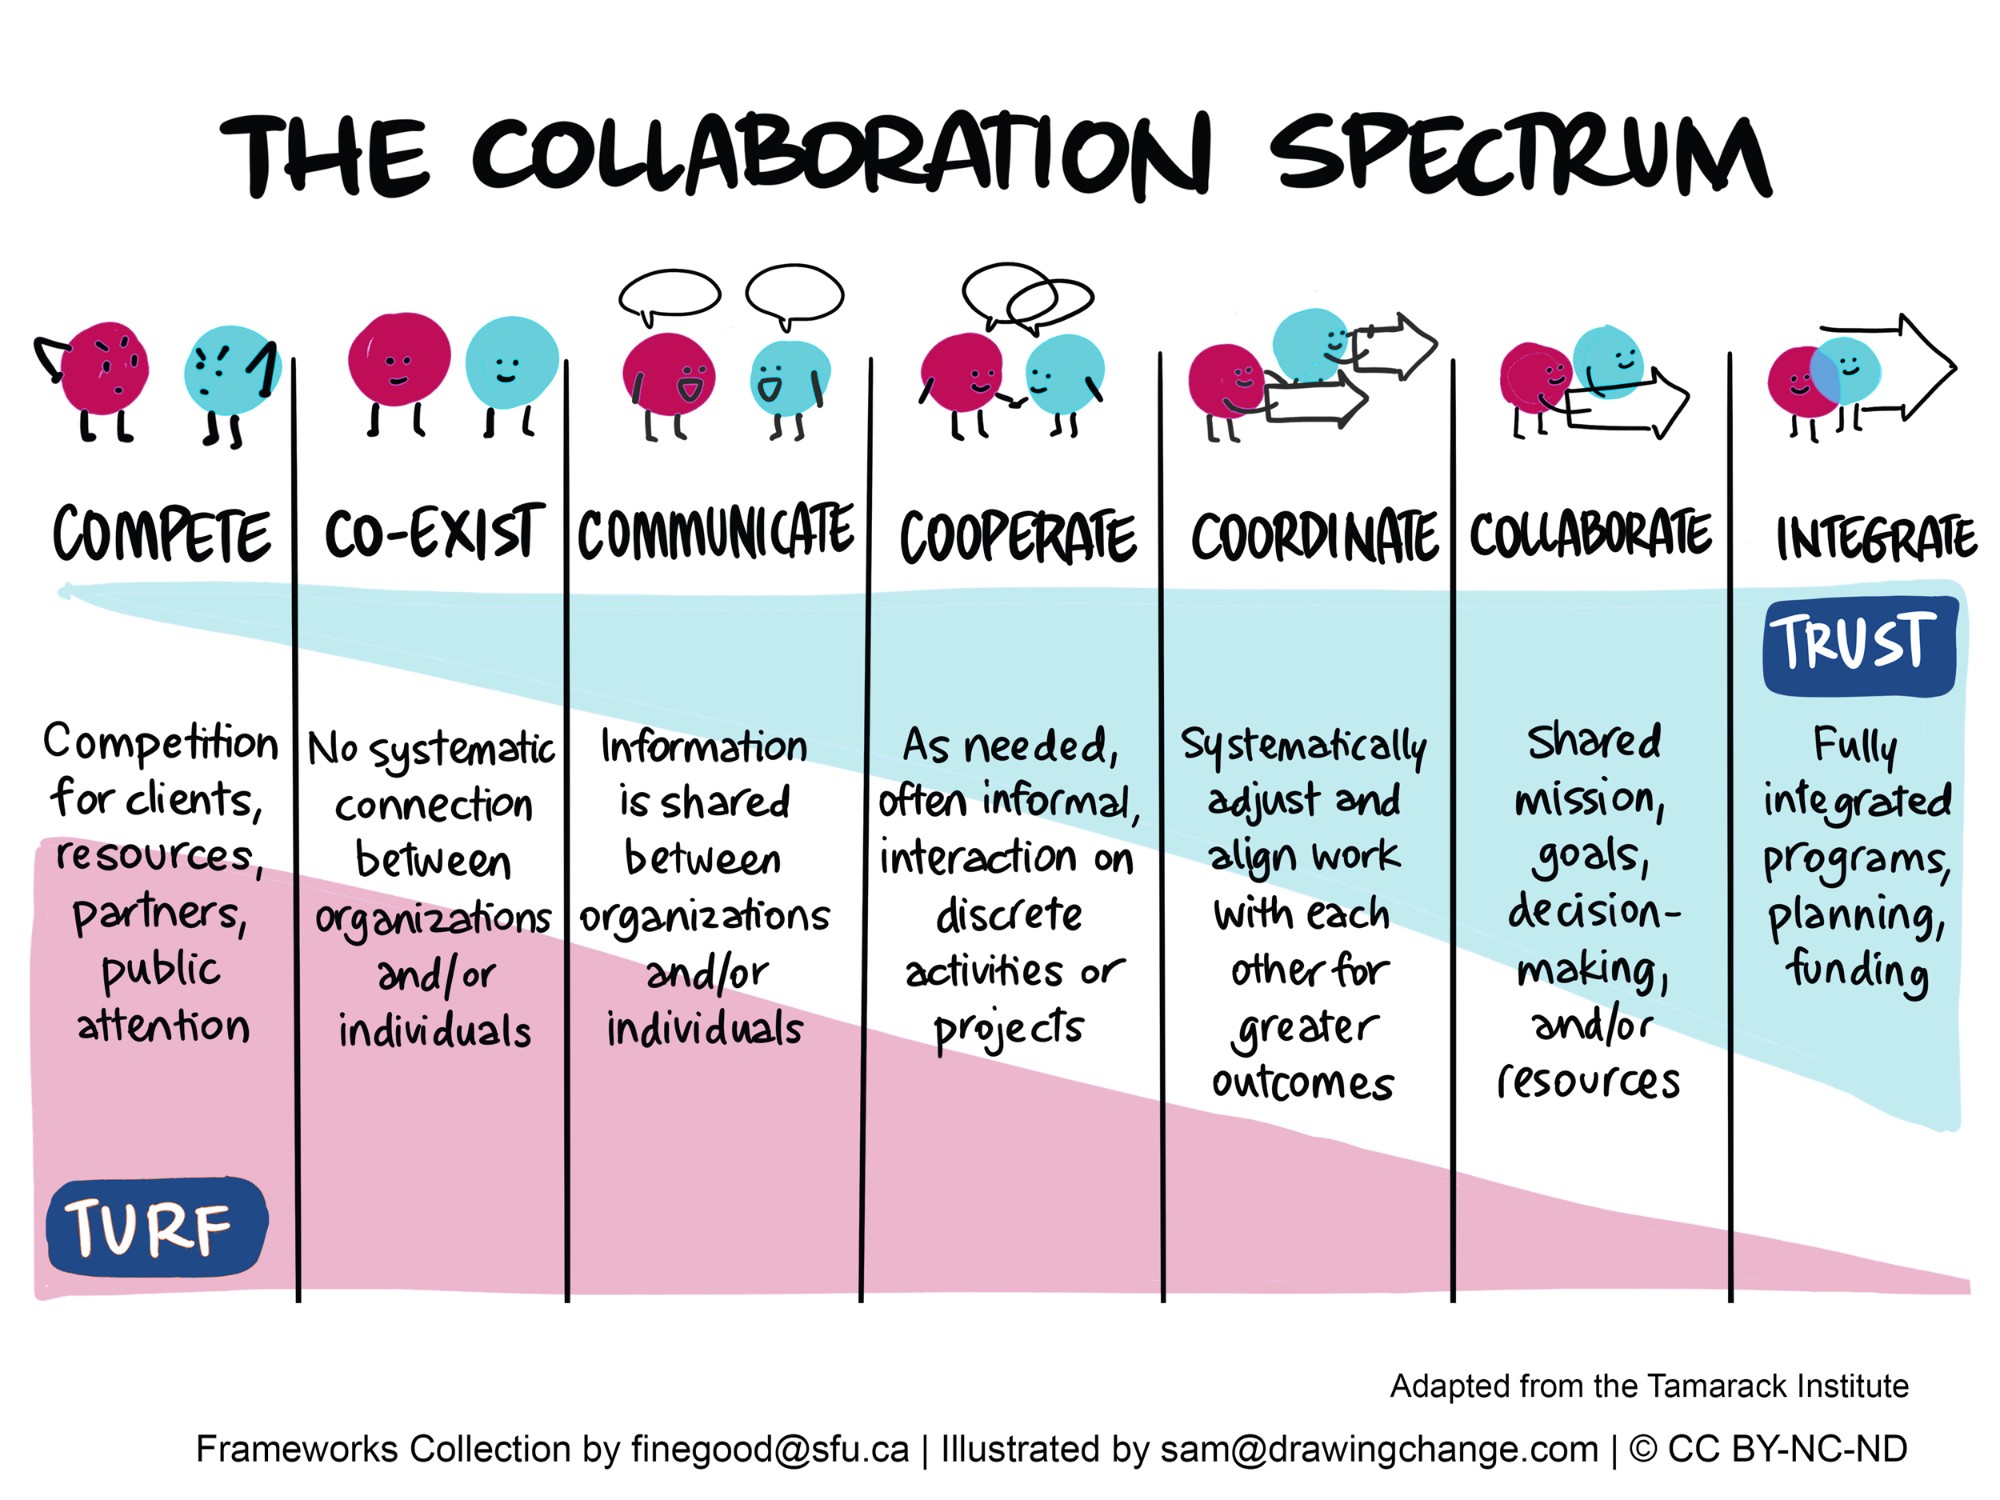 The image is an illustrated chart titled "THE COLLABORATION SPECTRUM," detailing different levels of interaction between organizations or individuals. It’s adapted from the Tamarack Institute and part of the Frameworks Collection by finegood@sfu.ca, illustrated by sam@drawingchange.com, under a Creative Commons license (CC BY-NC-ND).  Below each stage of the spectrum, there's a brief description:  COMPETE: Characters with angry faces and crossed arms represent "Competition for clients, resources, partners, public attention." CO-EXIST: Characters standing separately represent "No systematic connection between organizations and/or individuals." COMMUNICATE: Characters facing each other with speech bubbles signify "Information is shared between organizations and/or individuals." COOPERATE: Characters with hands together suggest "As needed, often informal, interaction on discrete activities or projects." COORDINATE: Characters holding an arrow together illustrate "Systematically adjust and align work with each other for greater outcomes." COLLABORATE: Characters holding a banner indicate "Shared mission, goals, decision-making, and/or resources." INTEGRATE: Characters combining arrows represent "Fully integrated programs, planning, funding."  The spectrum ranges from "TURF" on the left, in dark pink, to "TRUST" on the right, in light blue, indicating a progression from competition to full integration as trust increases. Each stage is visually distinguished by a color that fades from pink to blue as collaboration deepens.